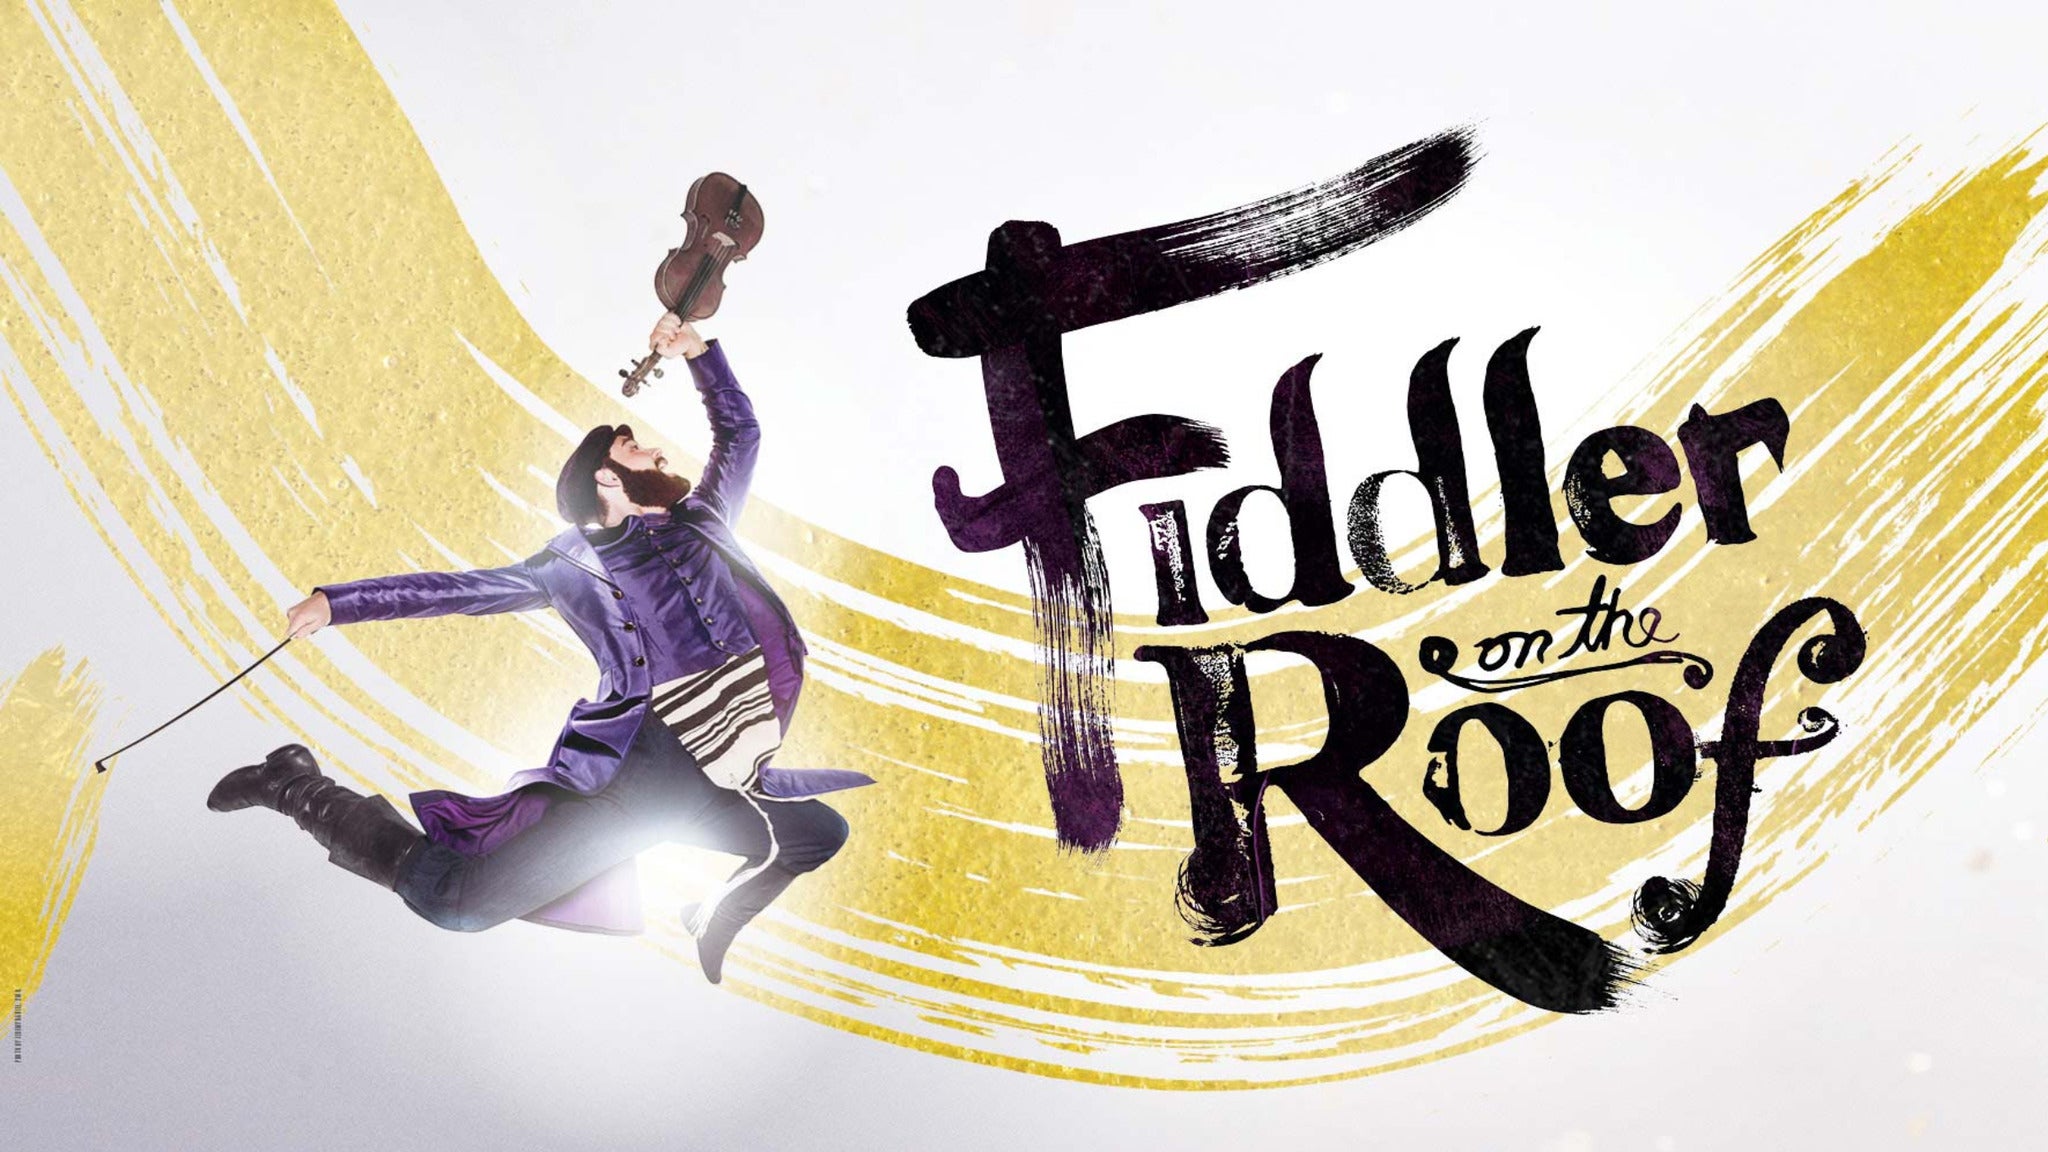 Fiddler On The Roof at Orpheum Theatre - Phoenix